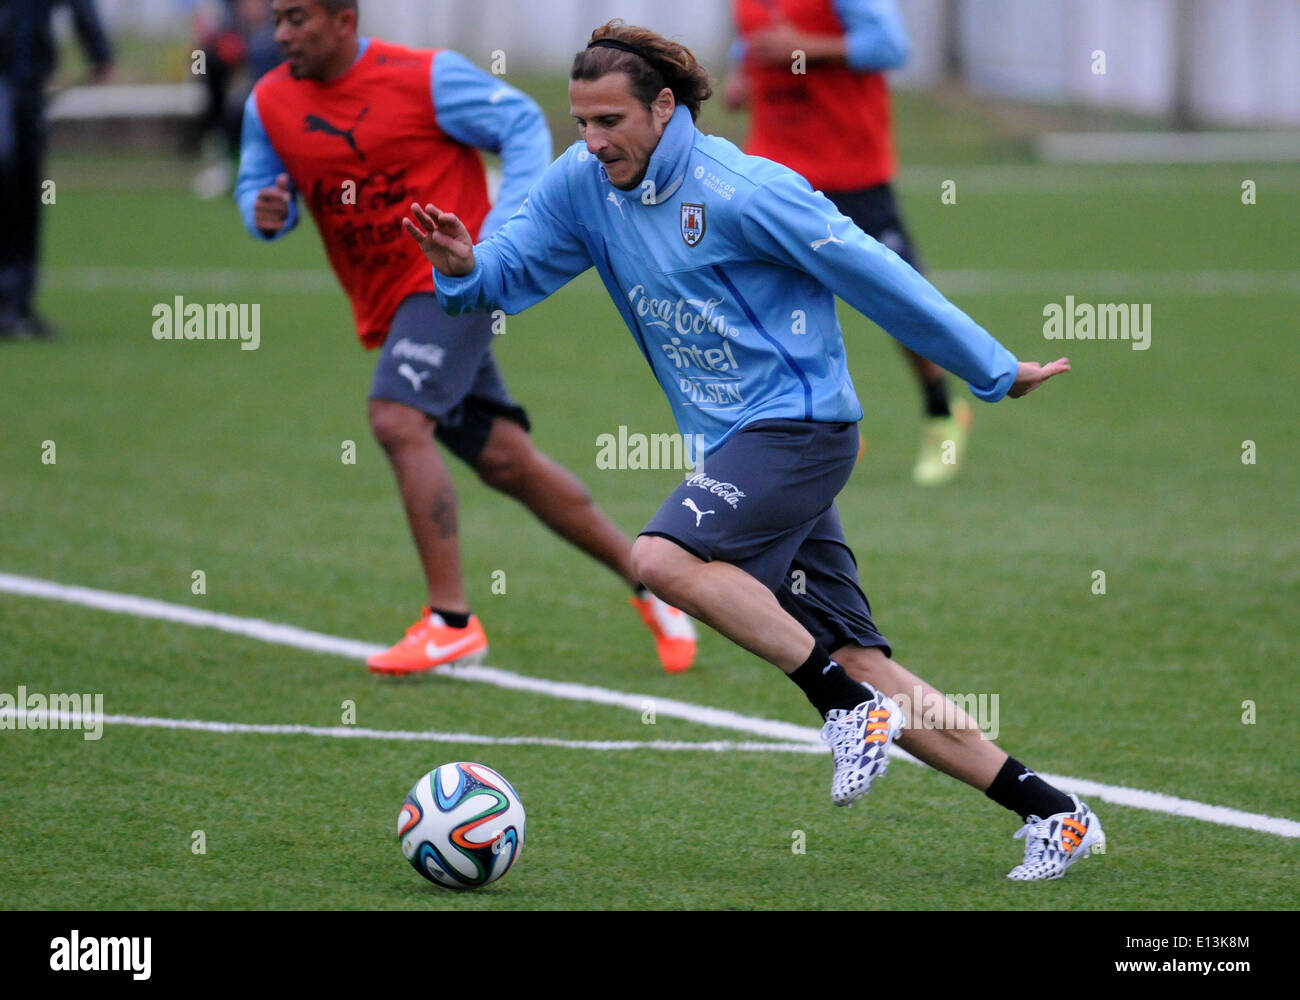 Montevideo, Uruguay. 21st May, 2014. Uruguay's national team player Diego Forlan takes part during a training session before the FIFA World Cup, at Uruguay Celeste complex, in Montevideo, capital of Uruguay, on May 21, 2014. © Nicolas Celaya/Xinhua/Alamy Live News Stock Photo